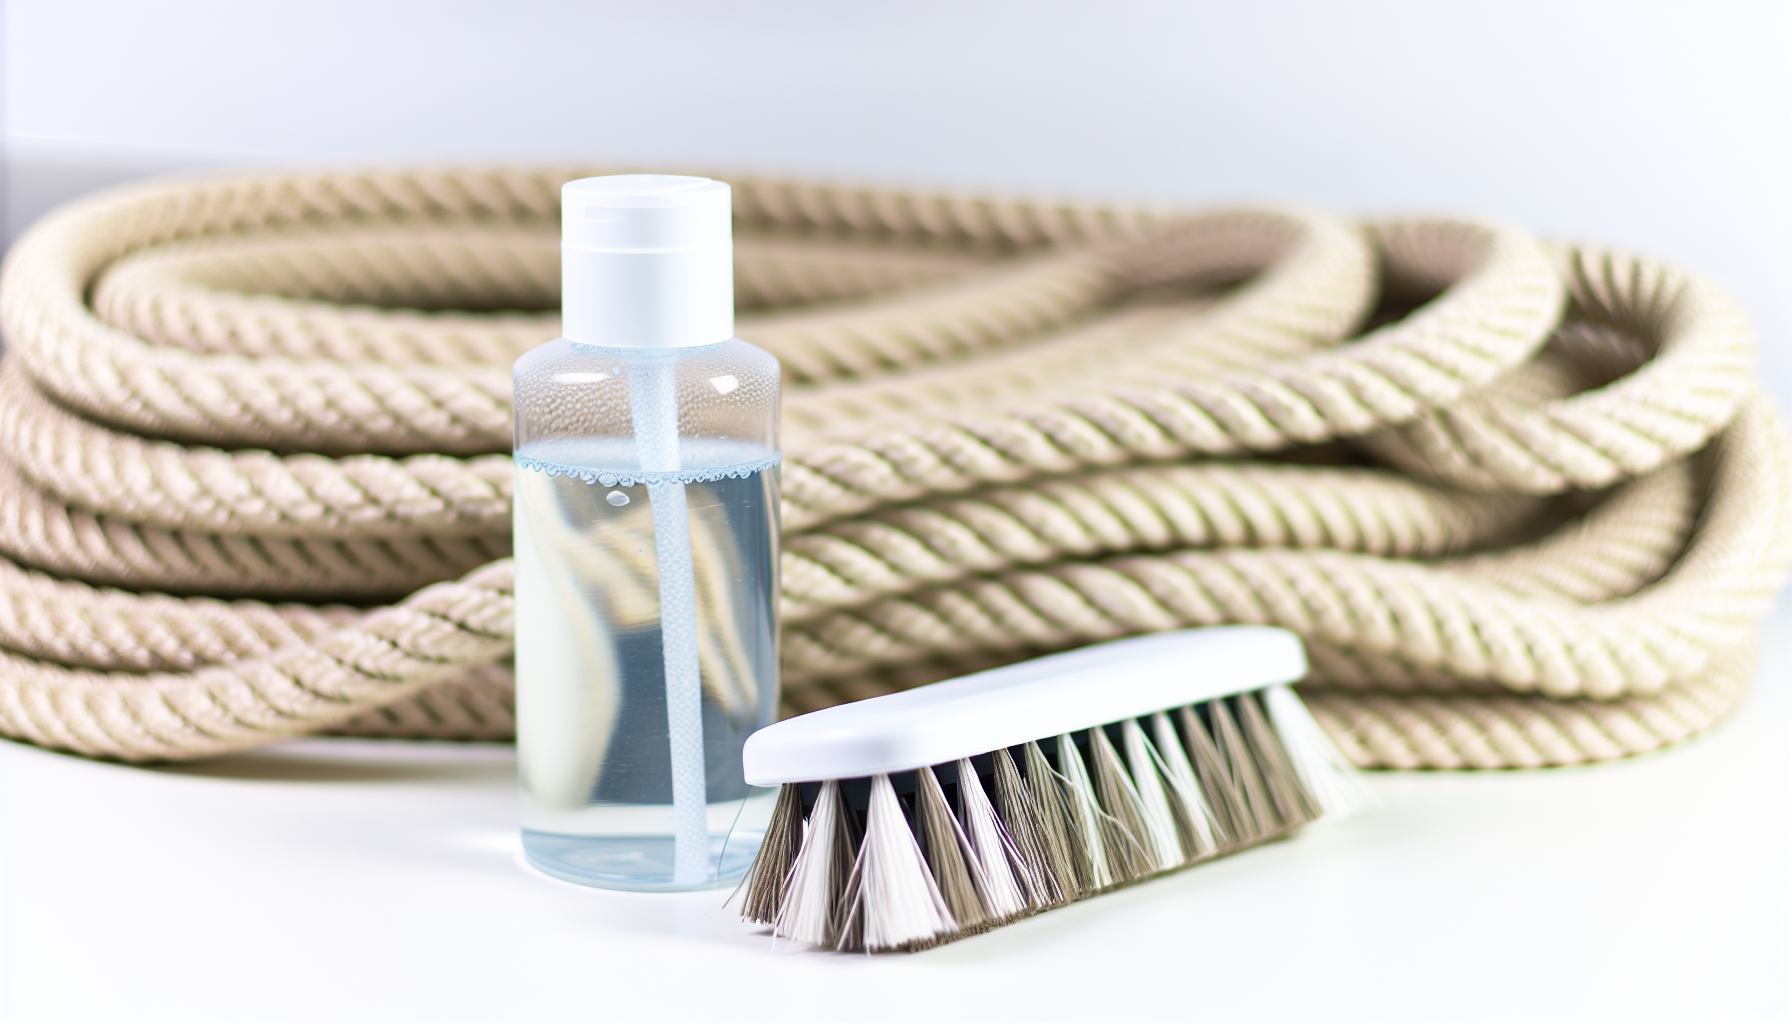 Cleaning solution and brush for rope laces